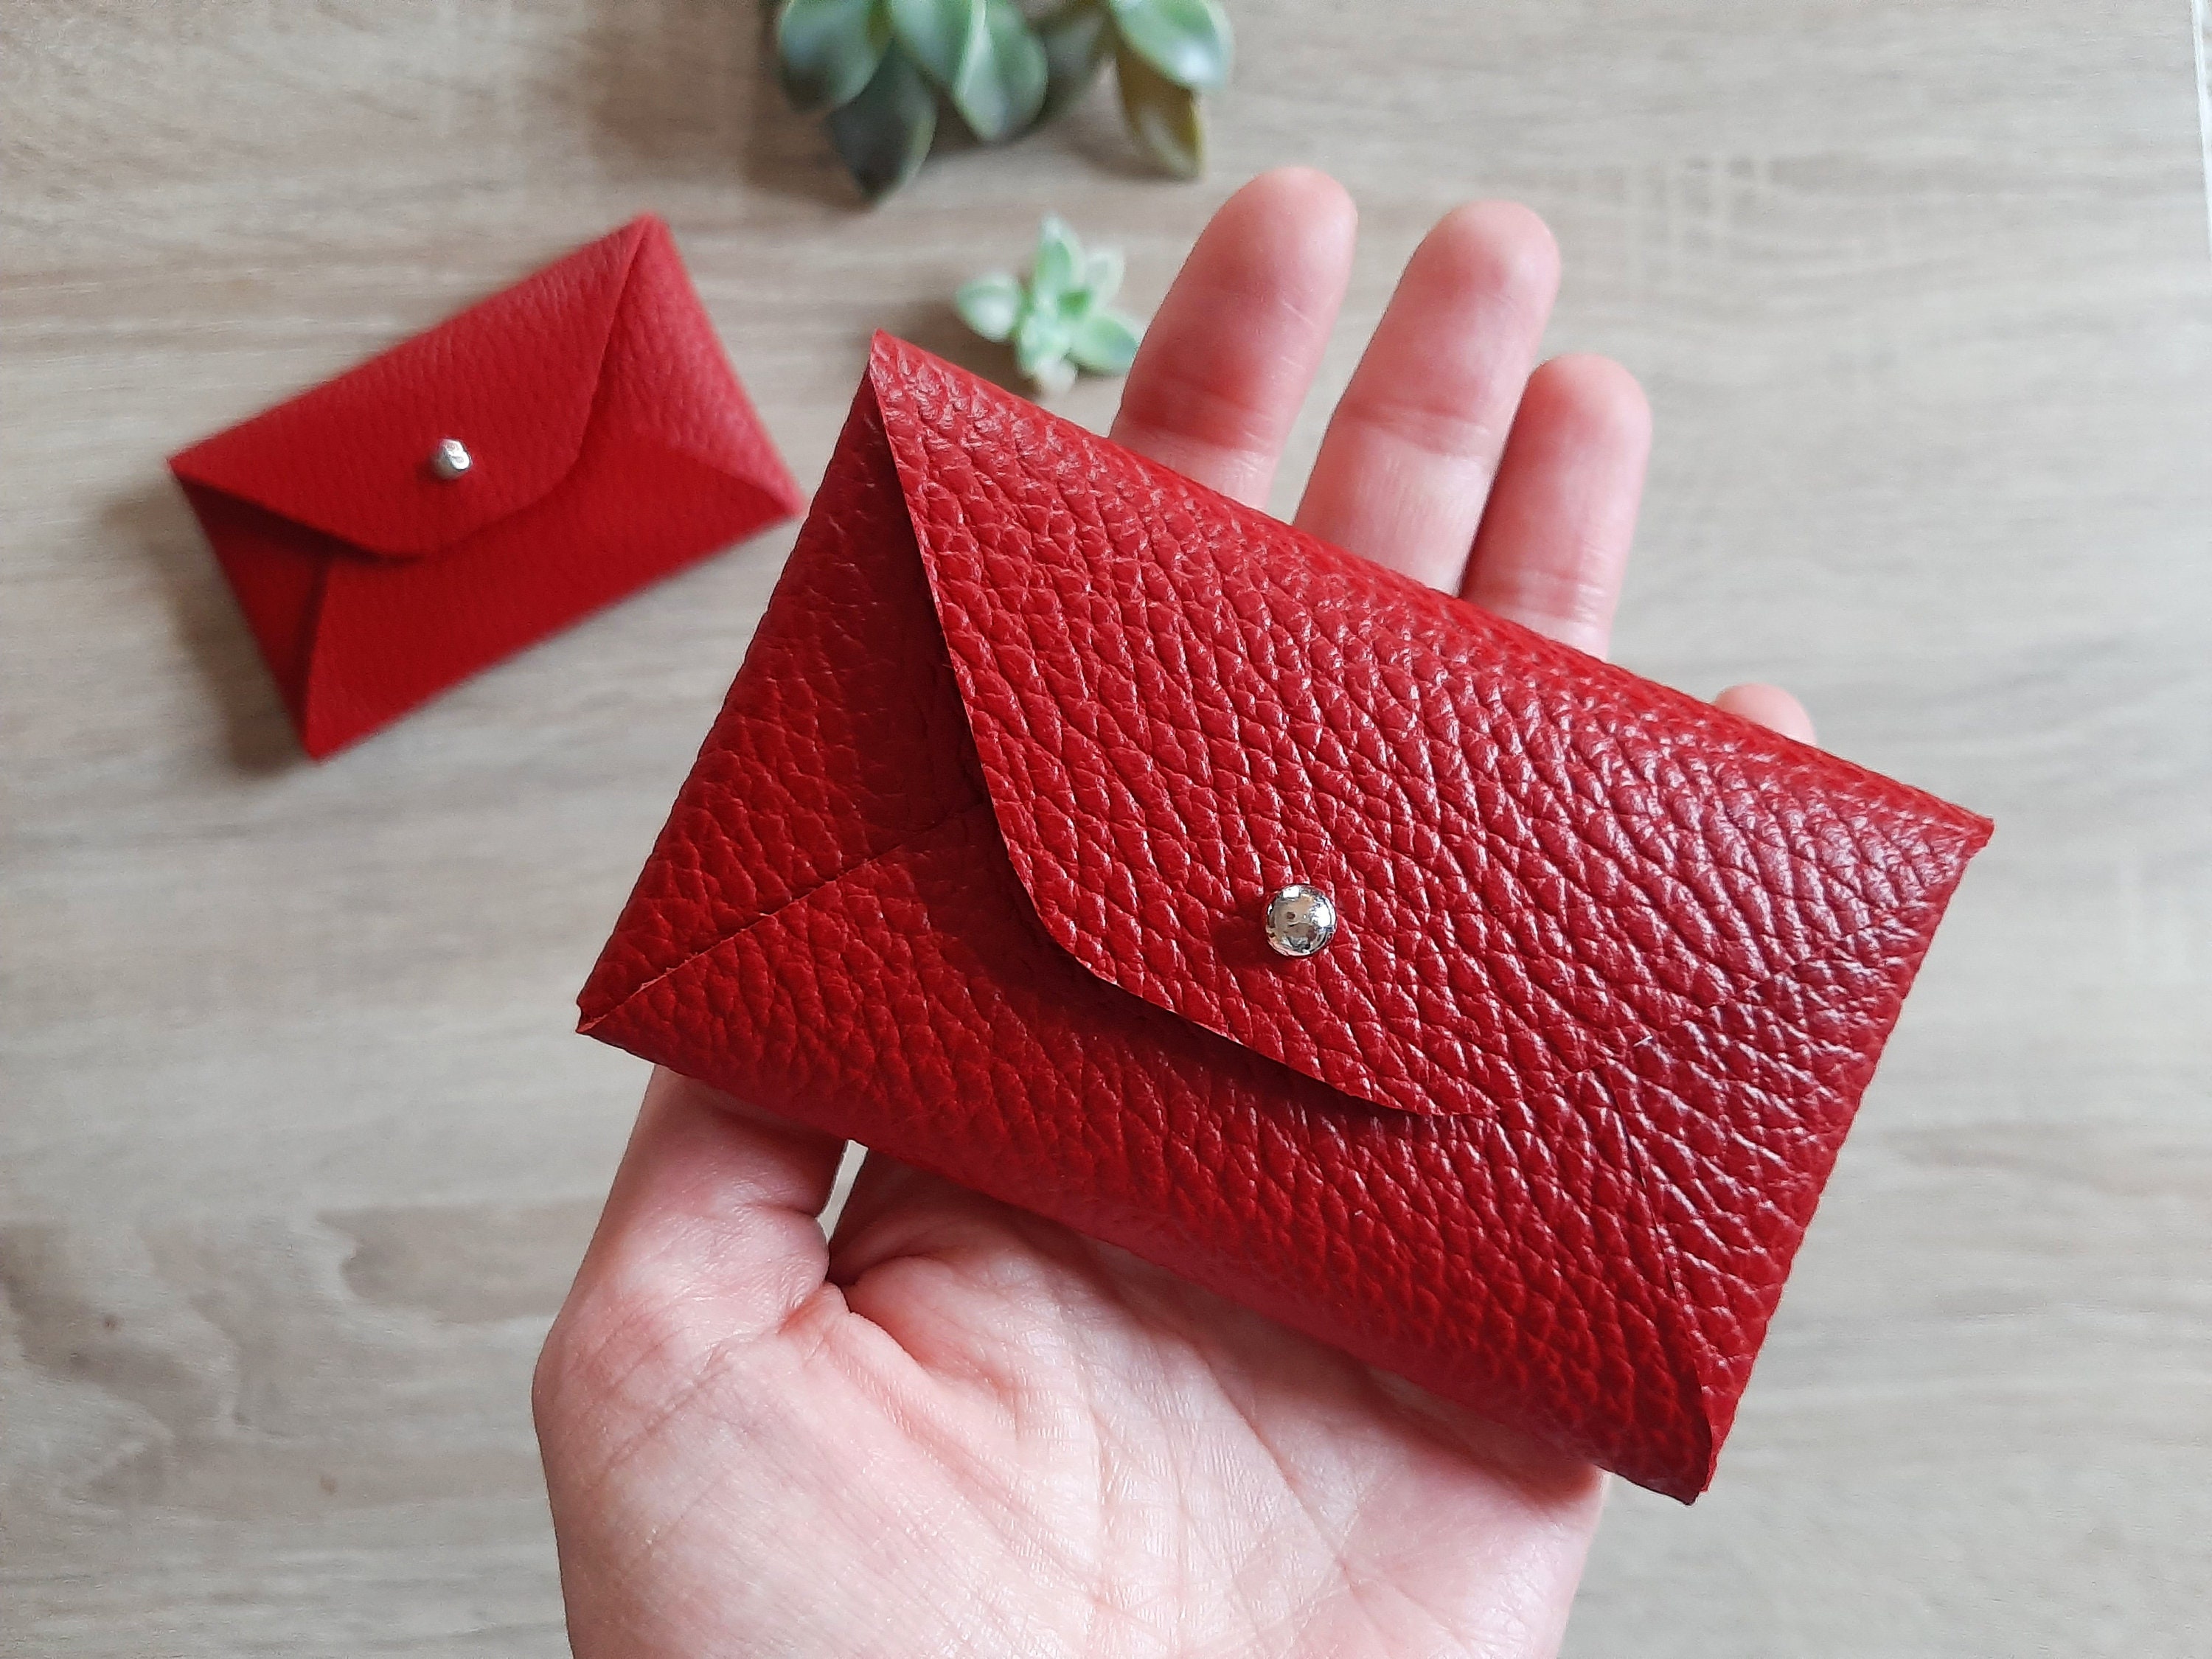 Personalized Folded Card Case